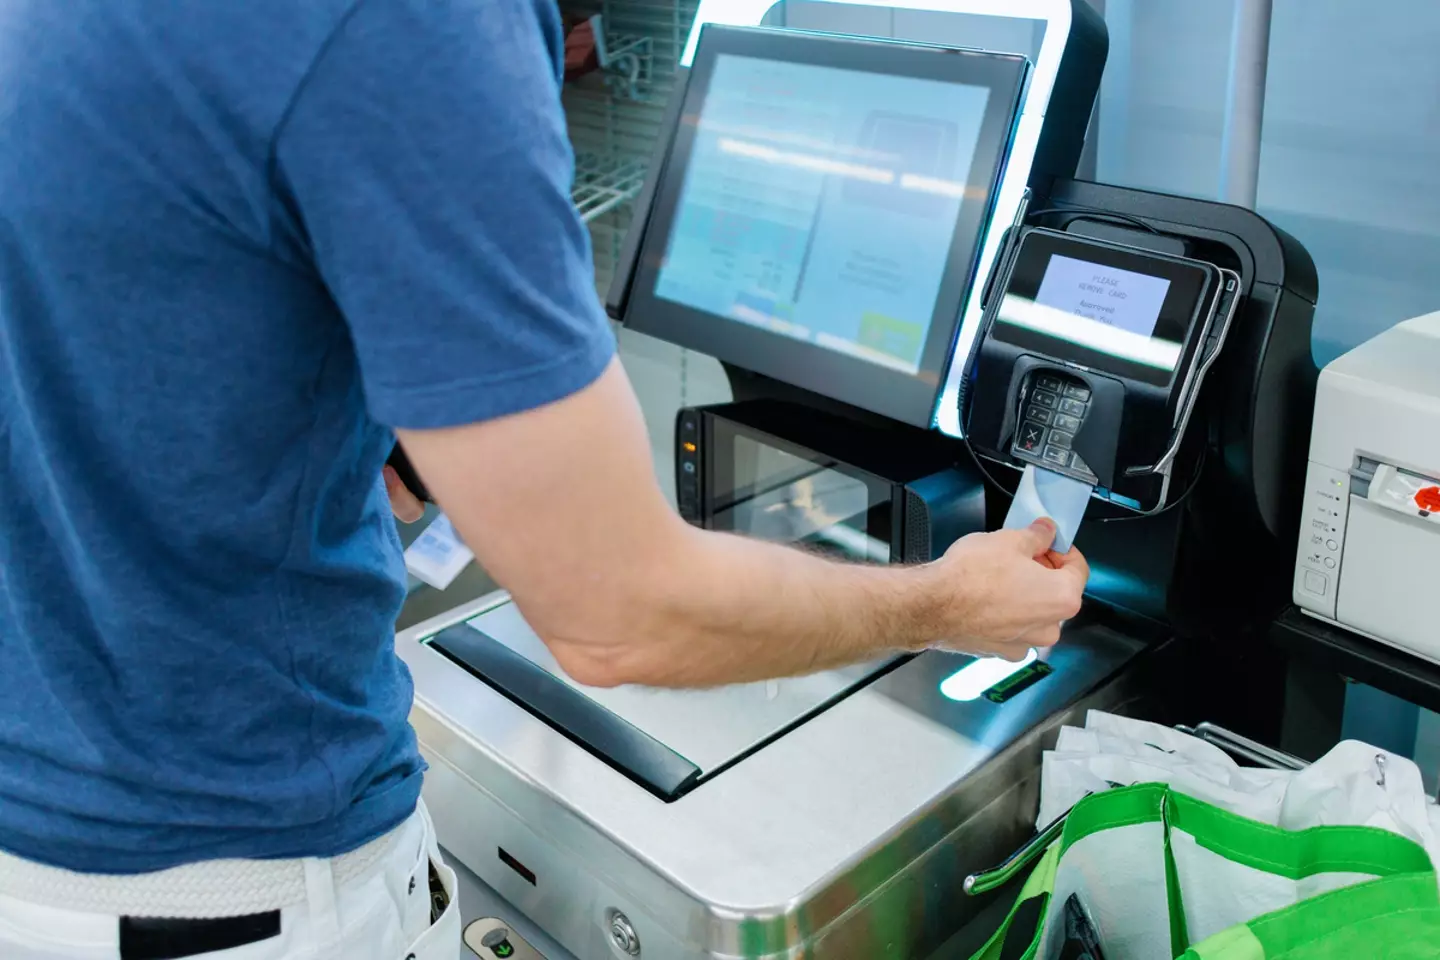 "Unexpected item in the bagging area. Also give me money or the robot revolution starts now, chump."